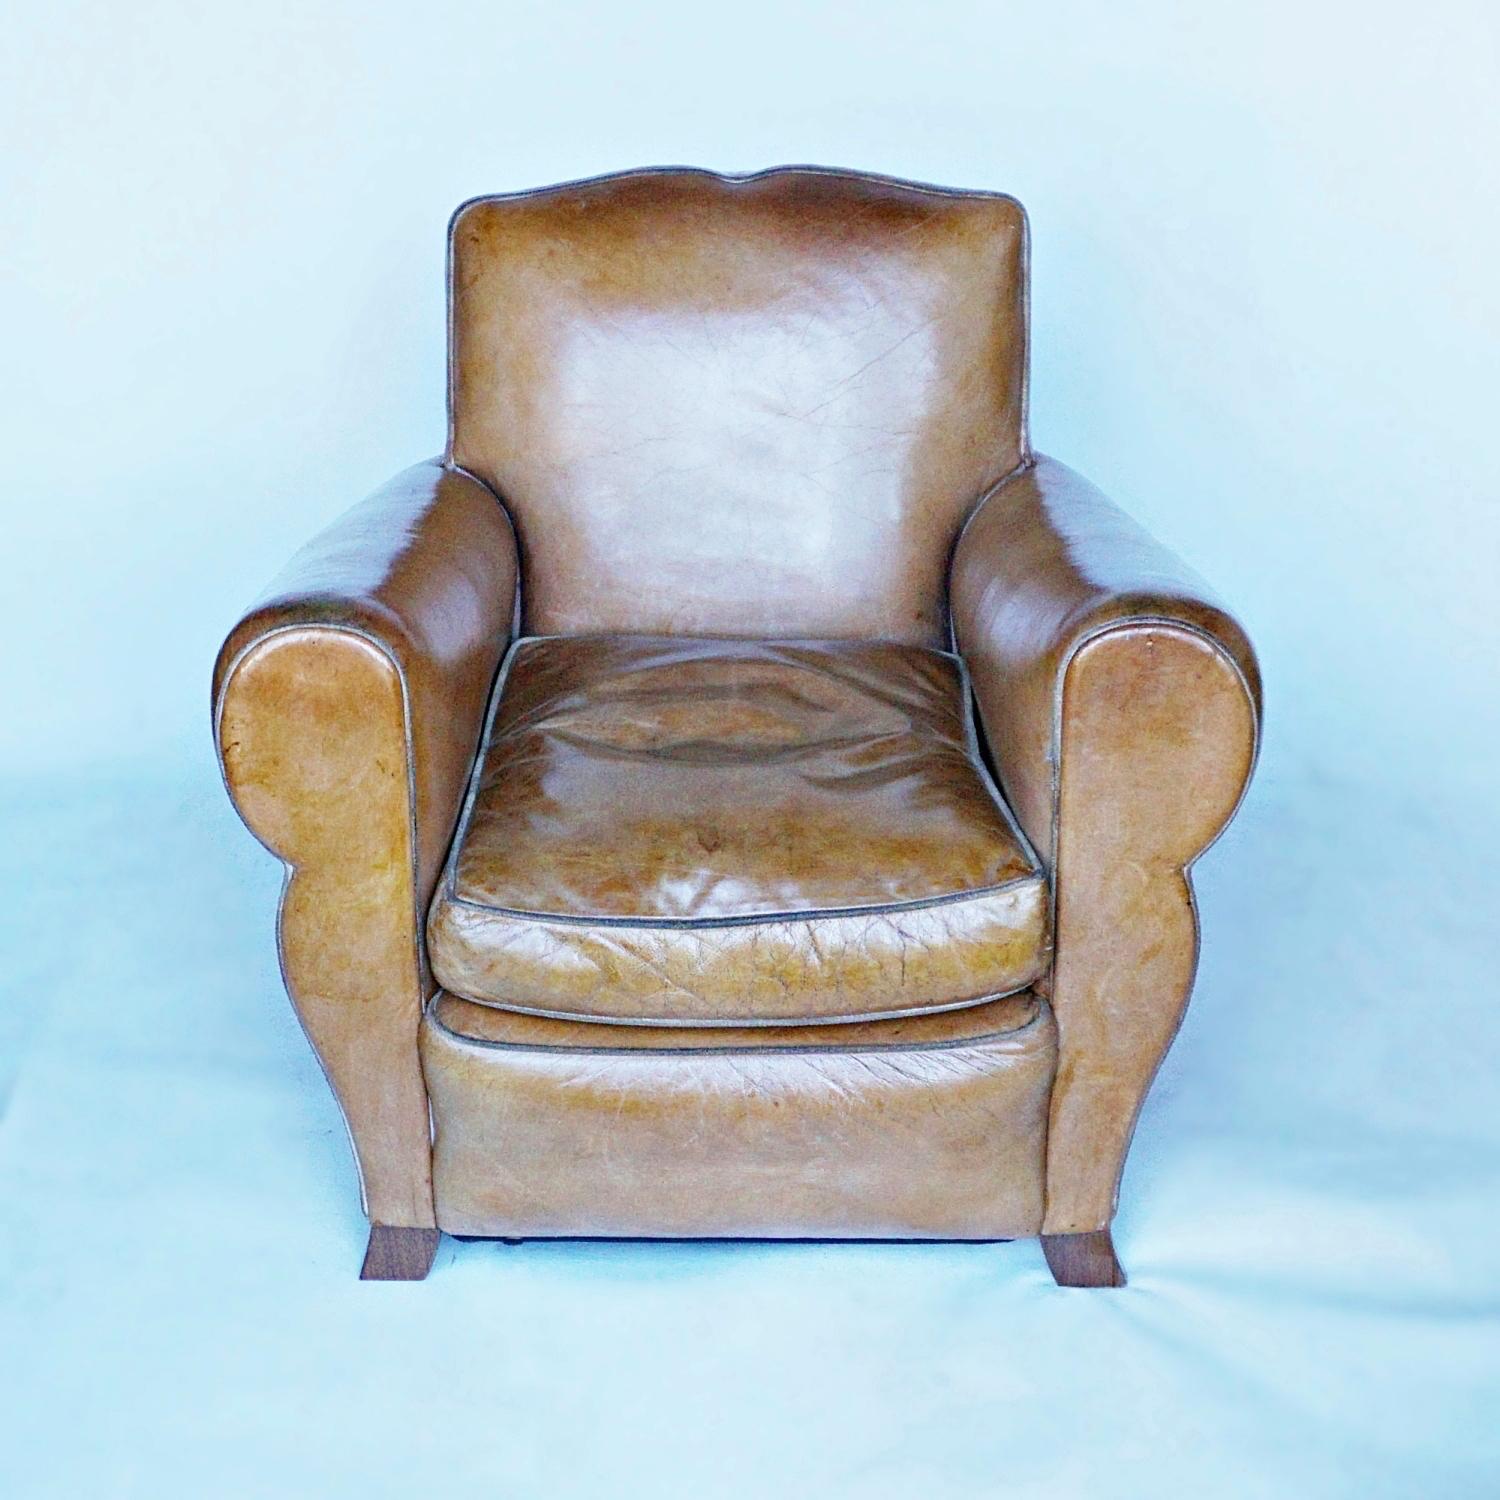 20th Century Pair of French Art Deco Club Chairs Upholstered in Brown Leather Circa 1940